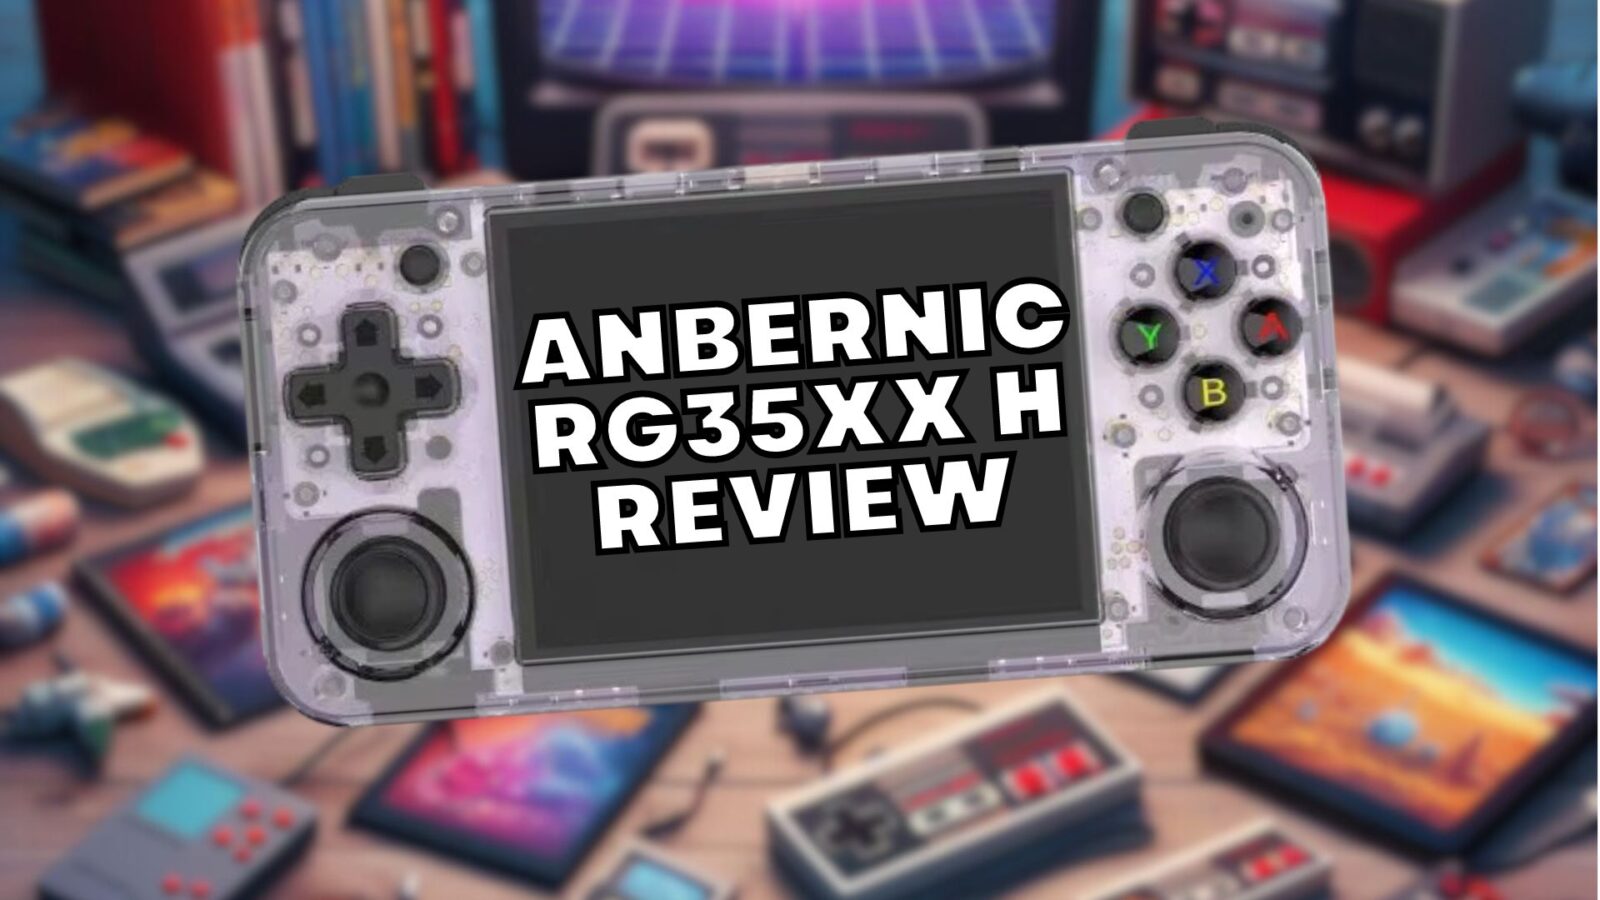 Anbernic RG35XX H Could be Great 